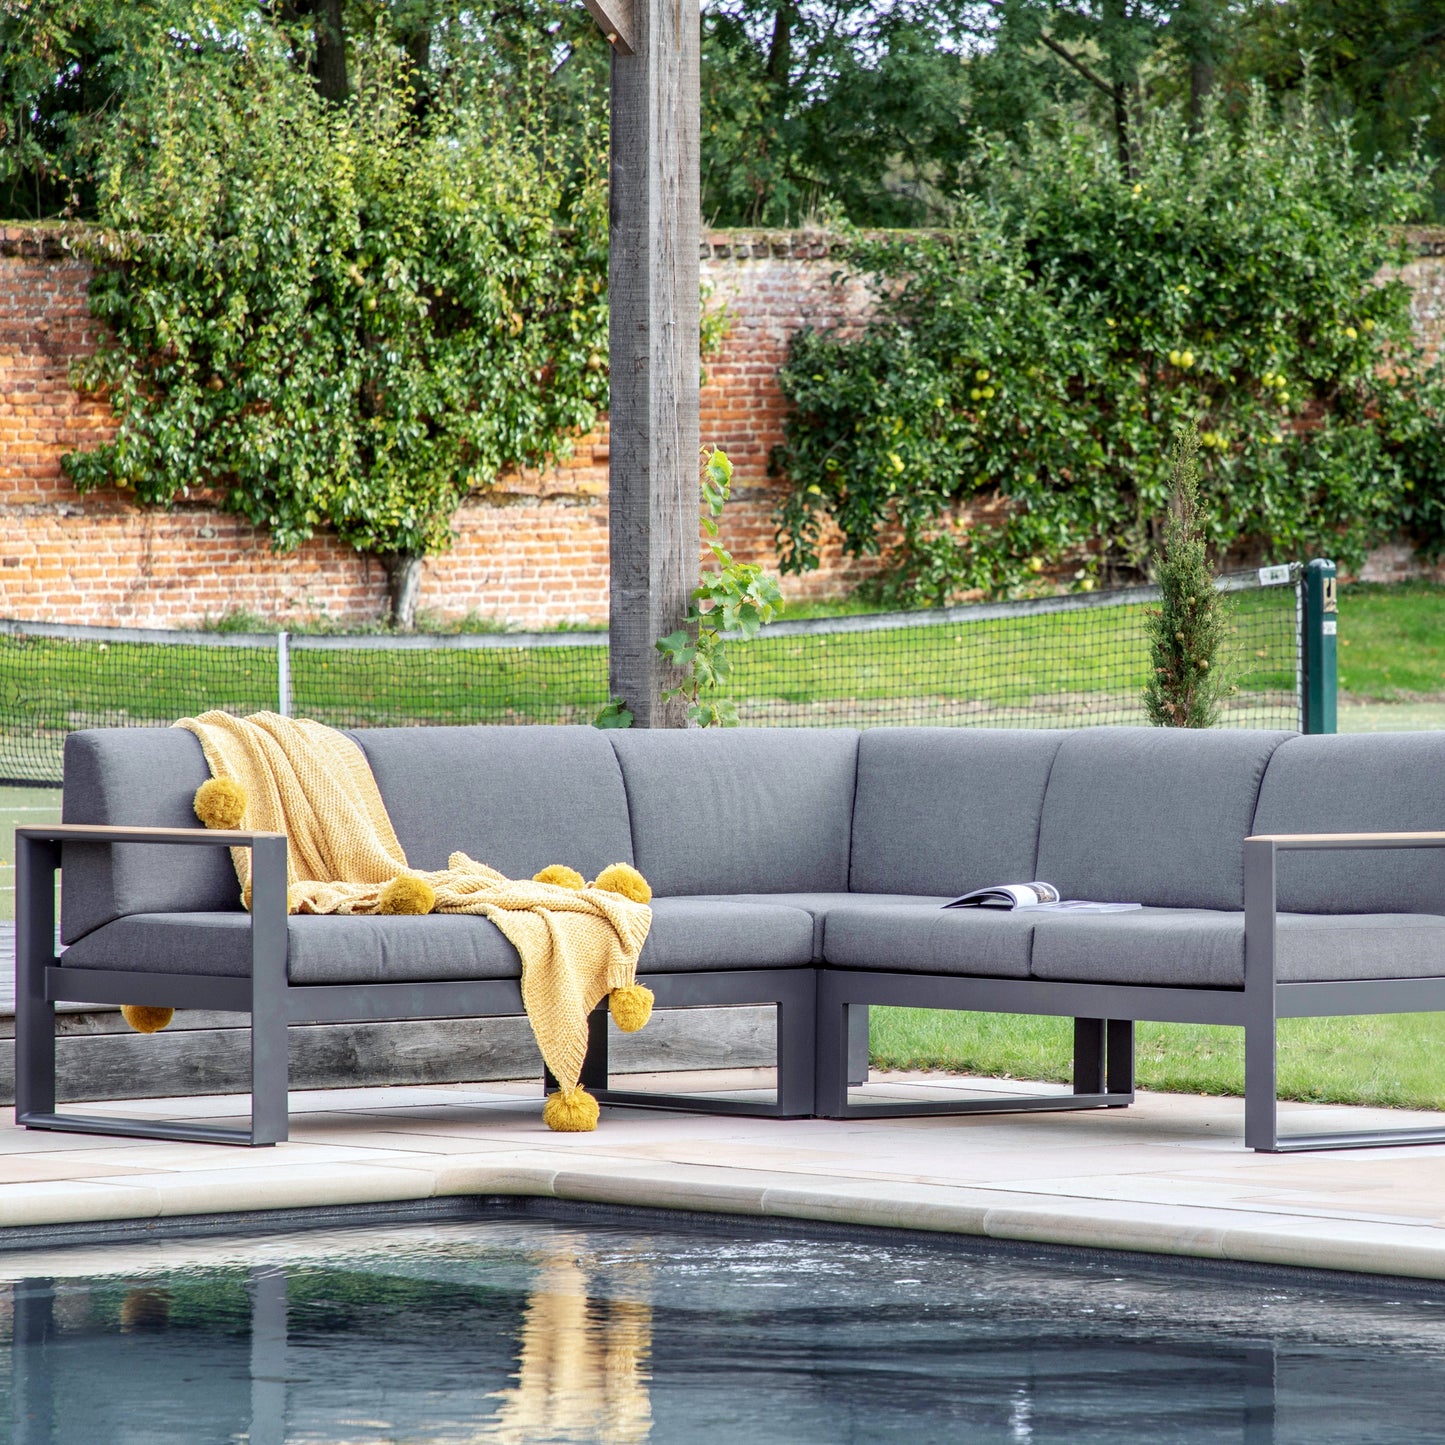 A Cornford Corner Sofa 2180x2180x590mm from Kikiathome.co.uk elegantly placed next to a pool, blending interior decor with outdoor home furniture.